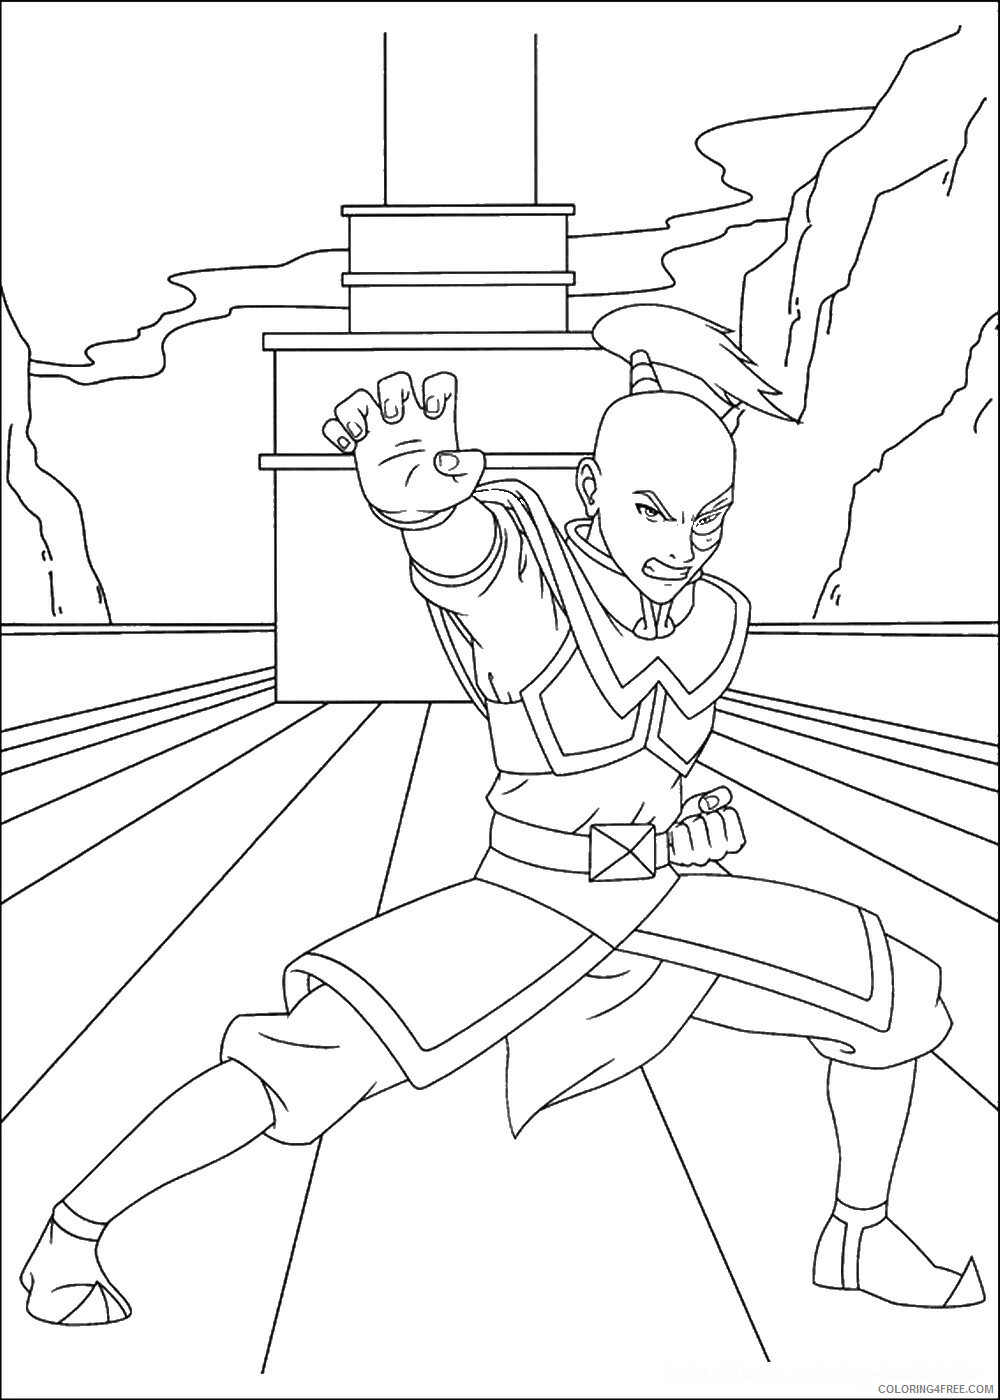 Avatar the Last Airbender Coloring Pages TV Film avatar_cl129 Printable 2020 00287 Coloring4free